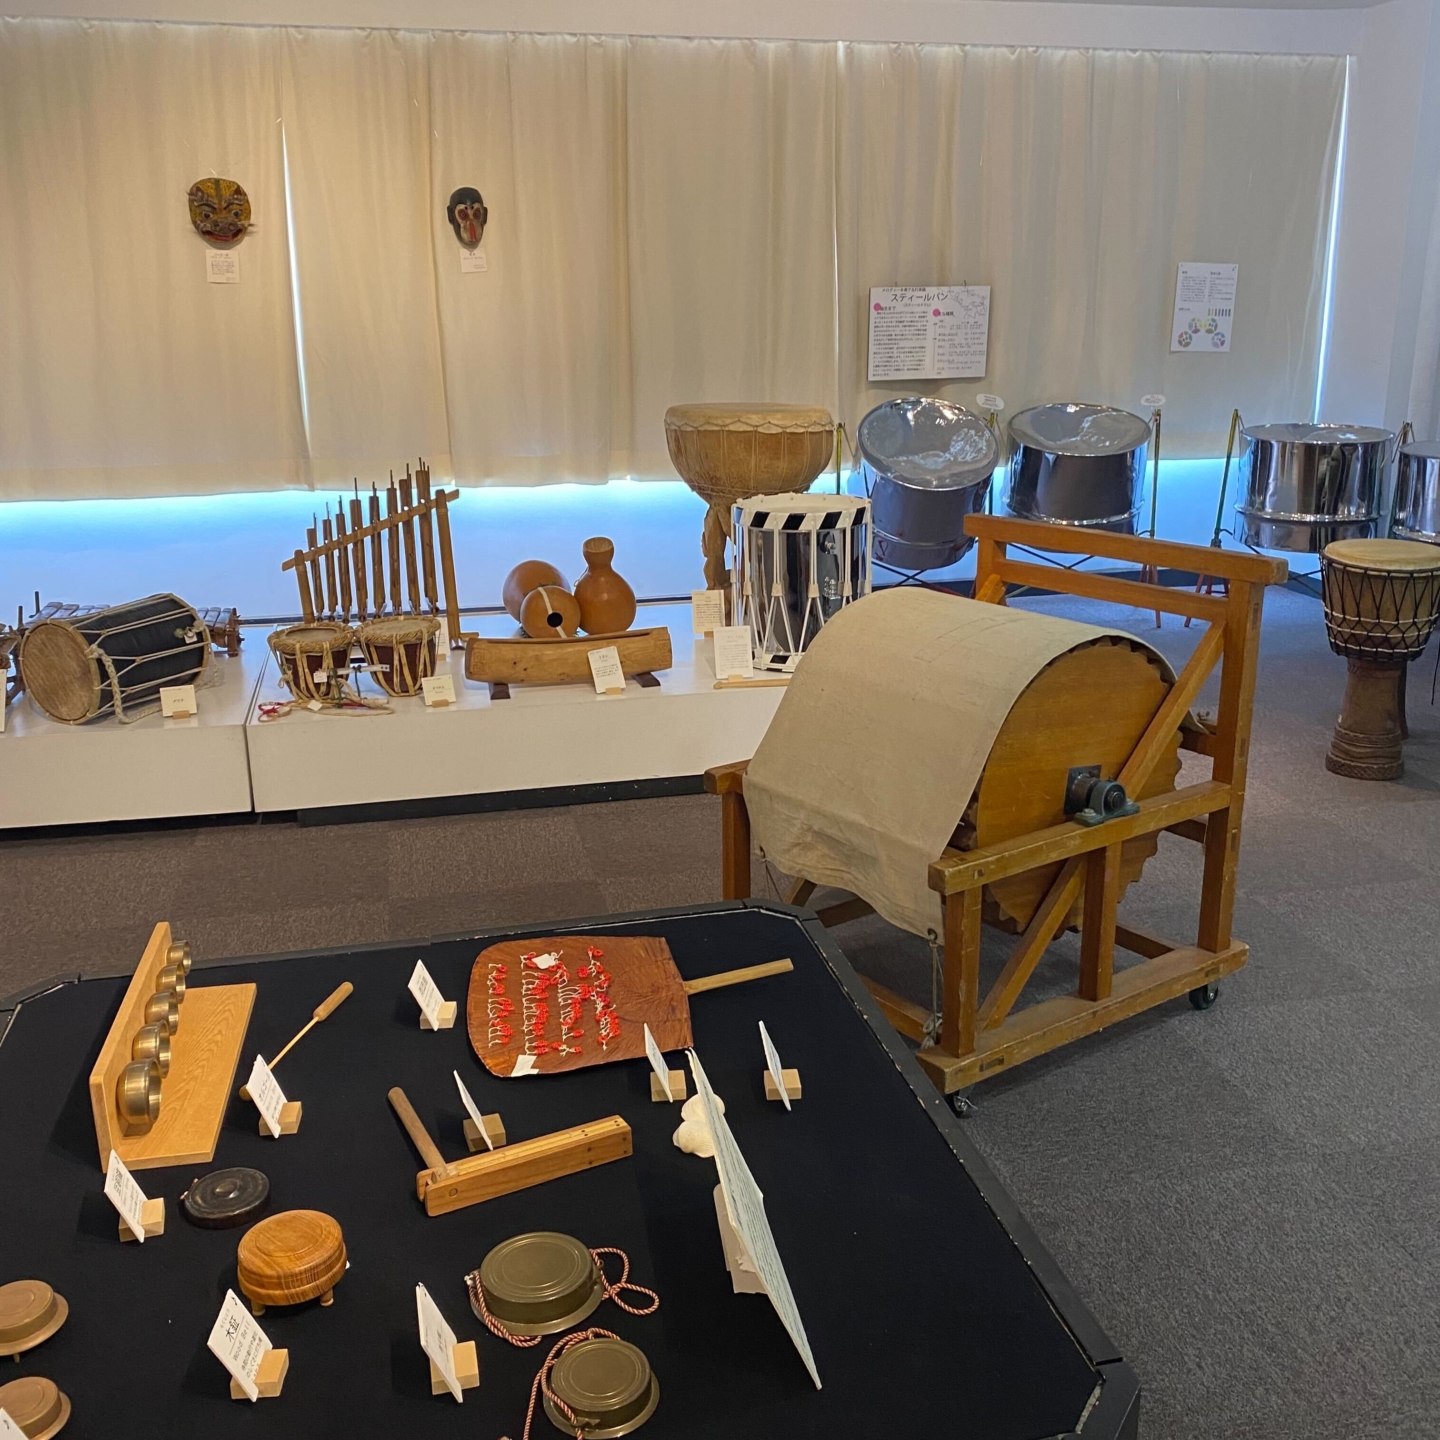 Summer events are being held at the Nishiasakusa store of Miyamoto Unosuke Shoten! A visit to the Drum Museum is also highly recommended.